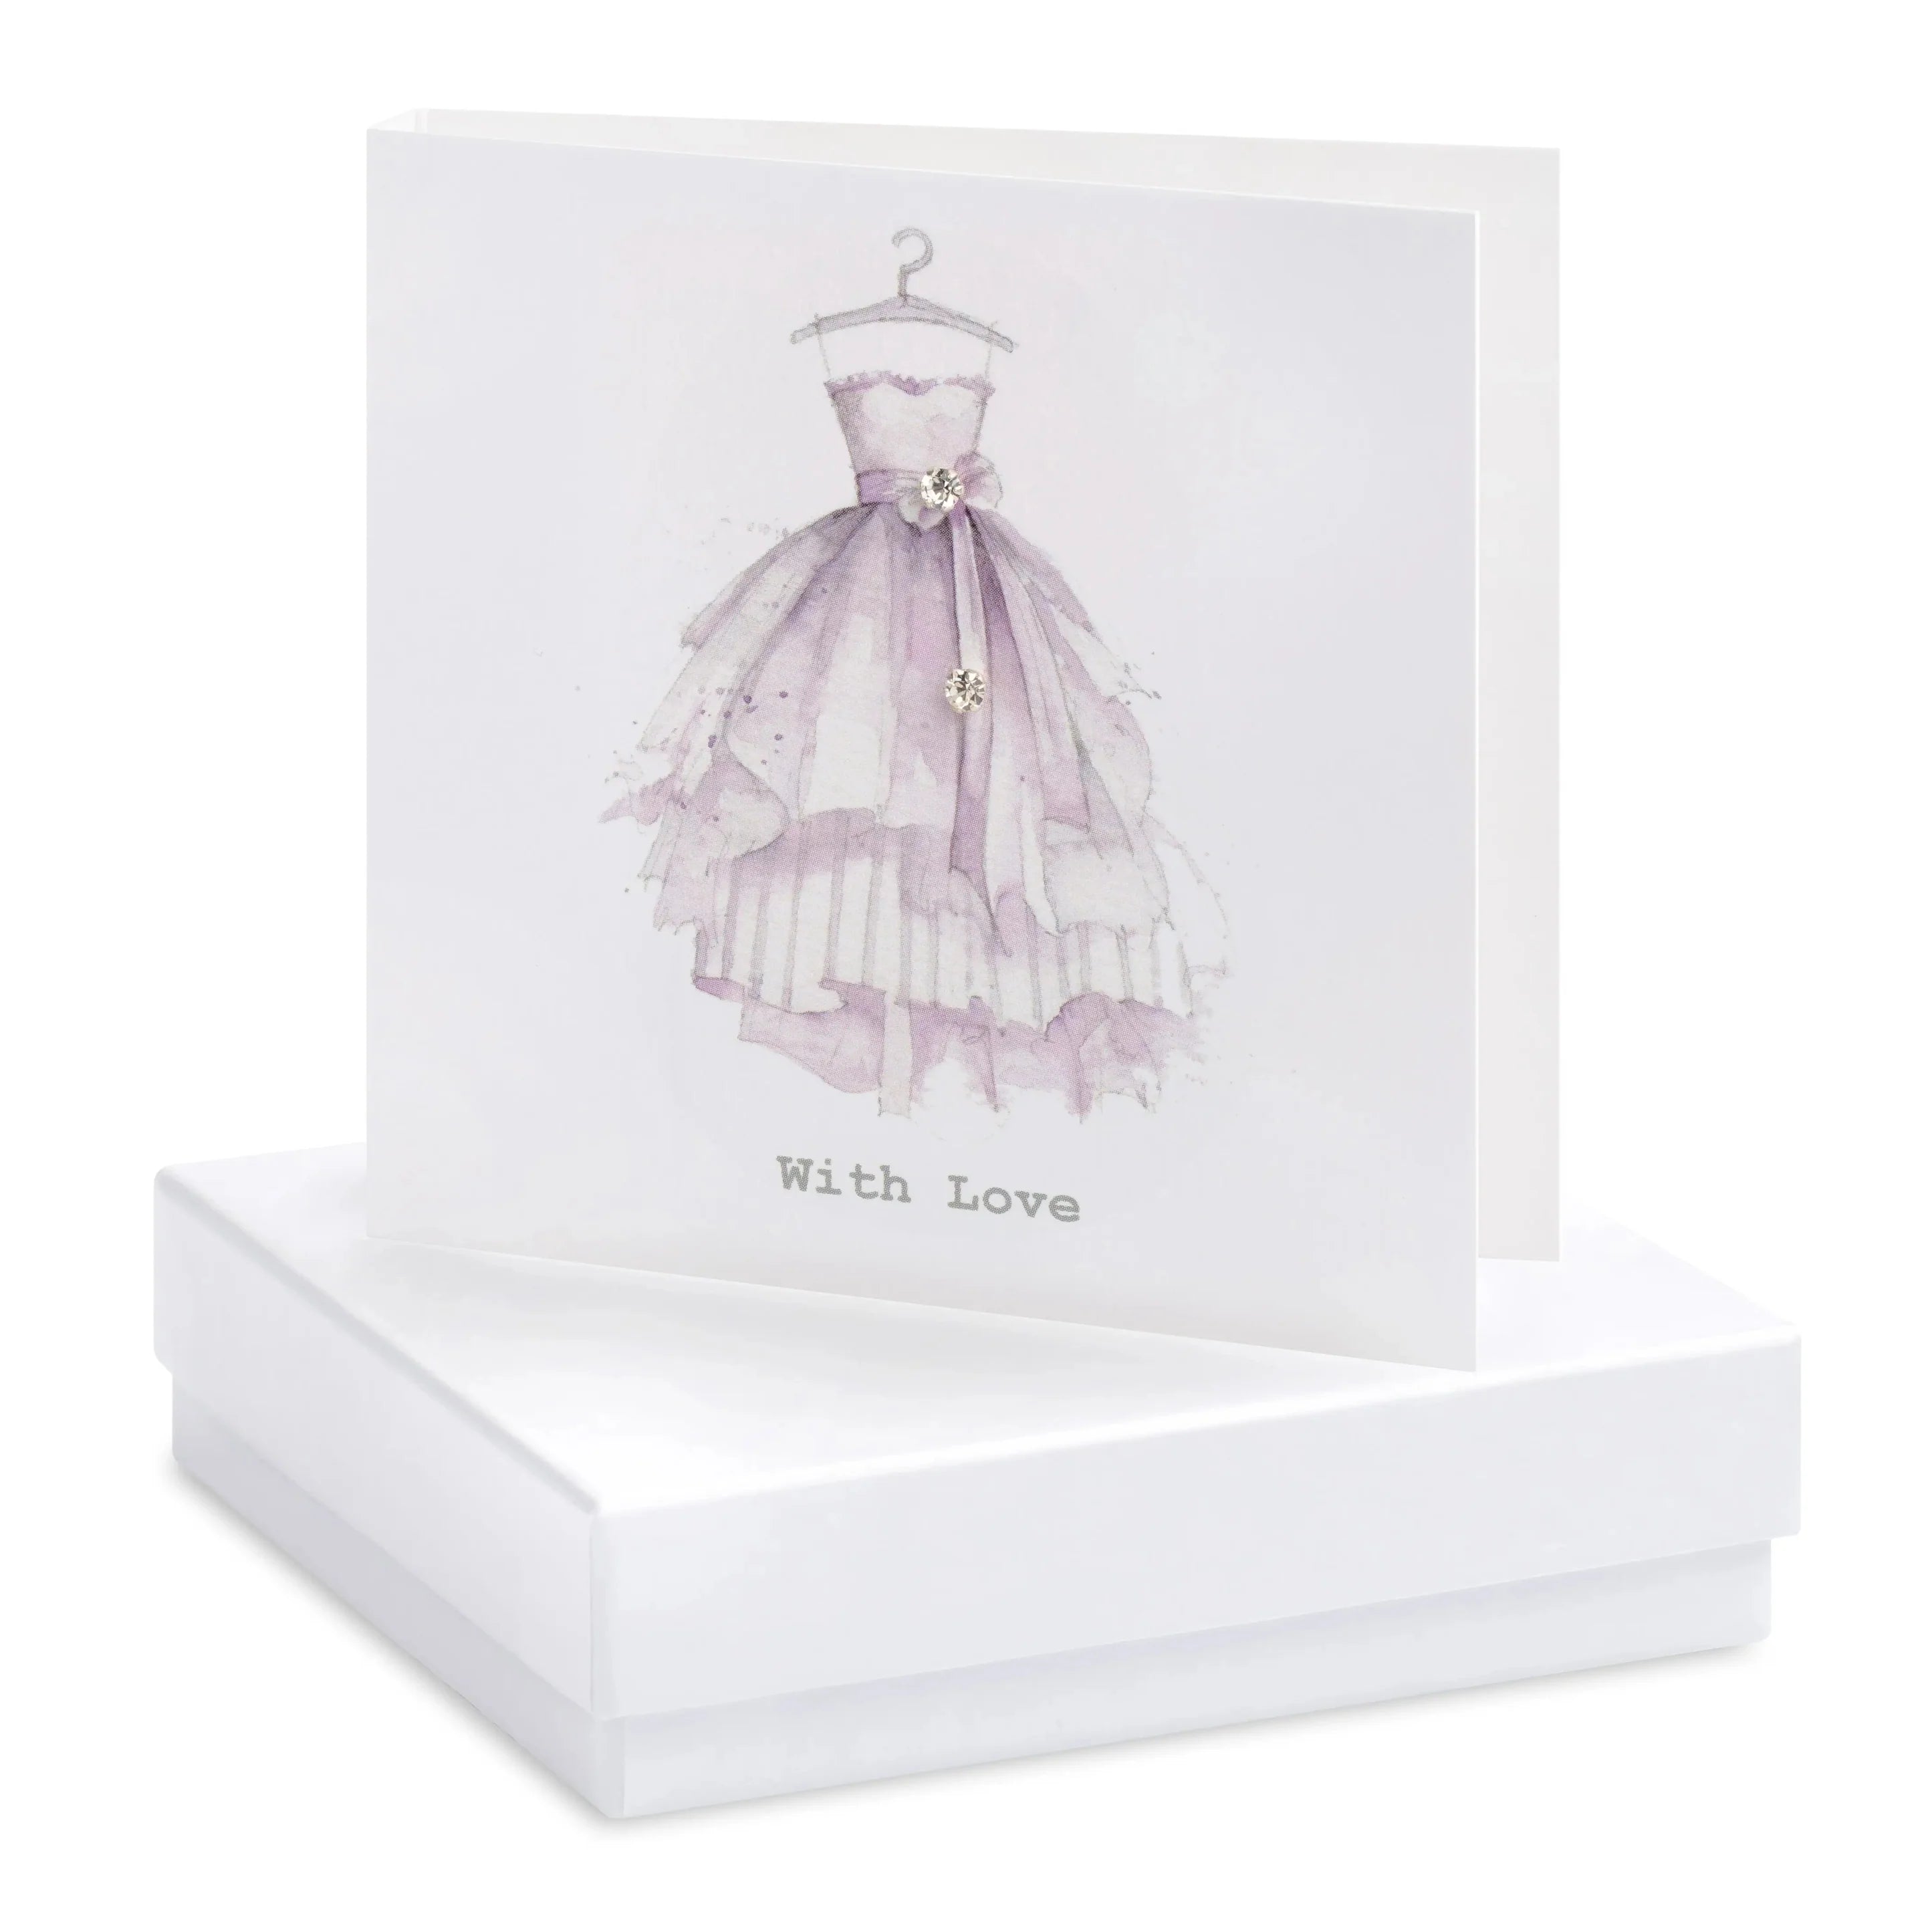 Fabulous Gifts Crumble & Core Box Dress With Love Earring Card by Weirs of Baggot Street